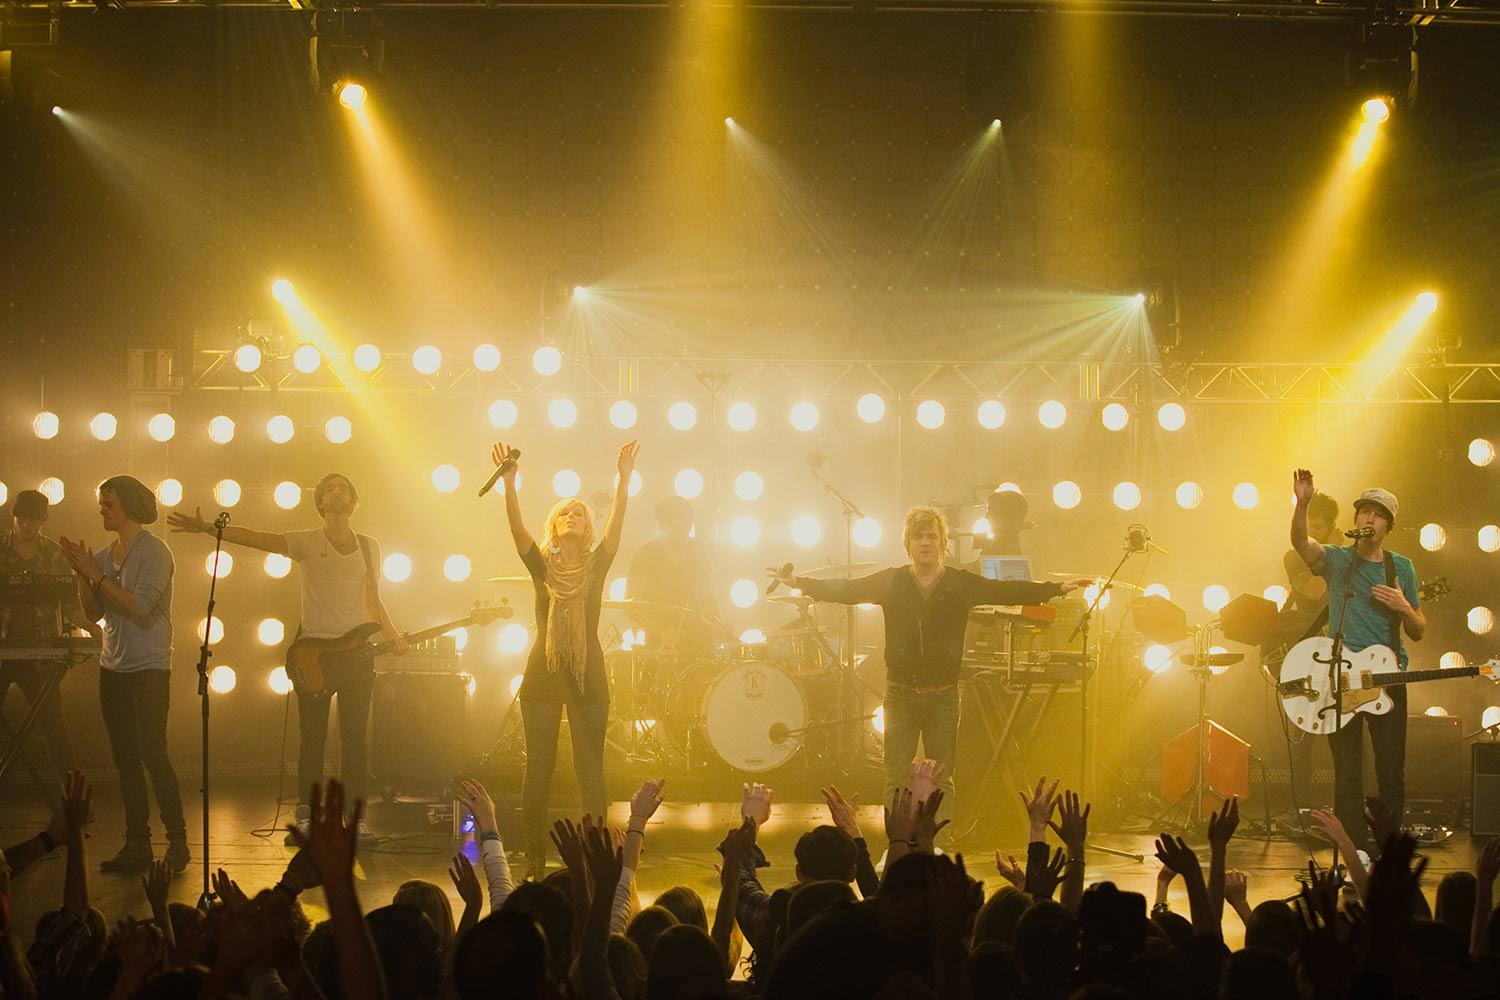 Elevation Worship - Only King Forever 2014 live performance in this tour